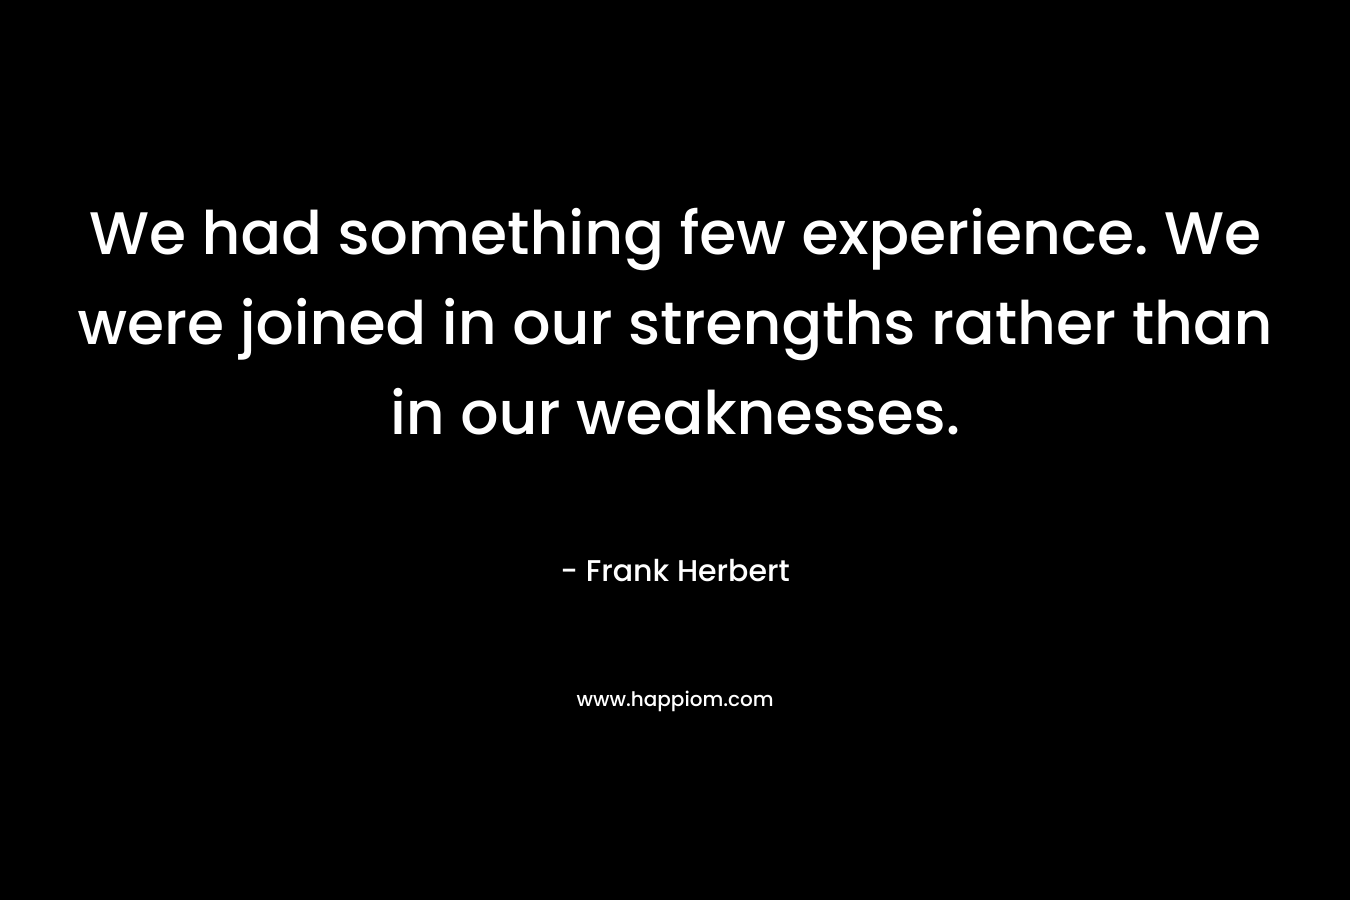 We had something few experience. We were joined in our strengths rather than in our weaknesses.